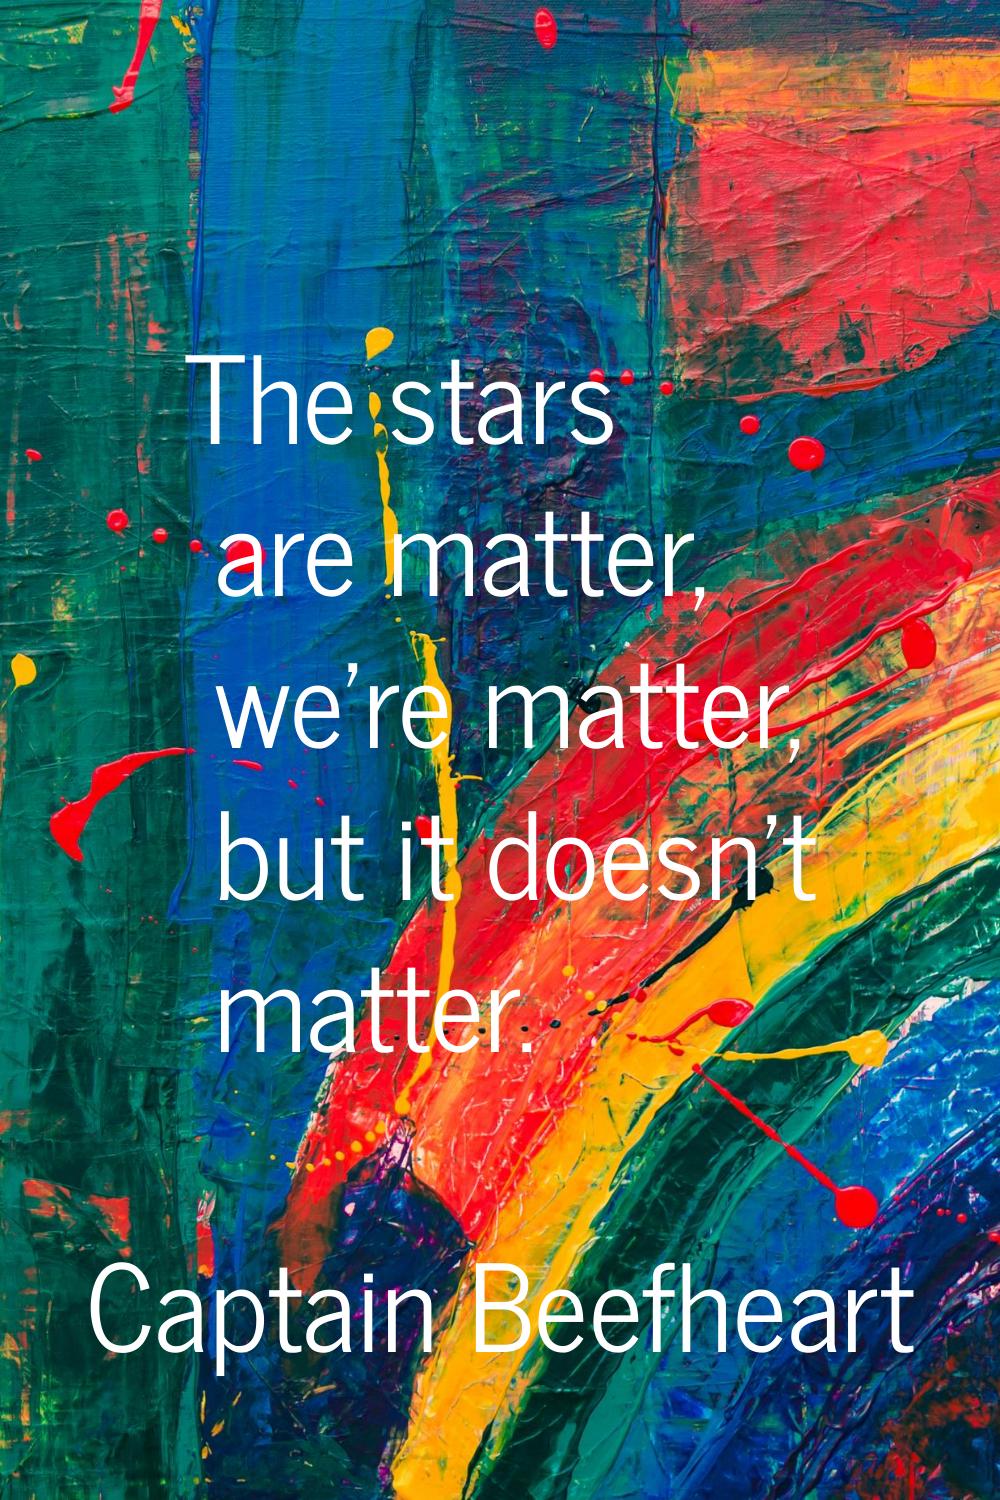 The stars are matter, we're matter, but it doesn't matter.